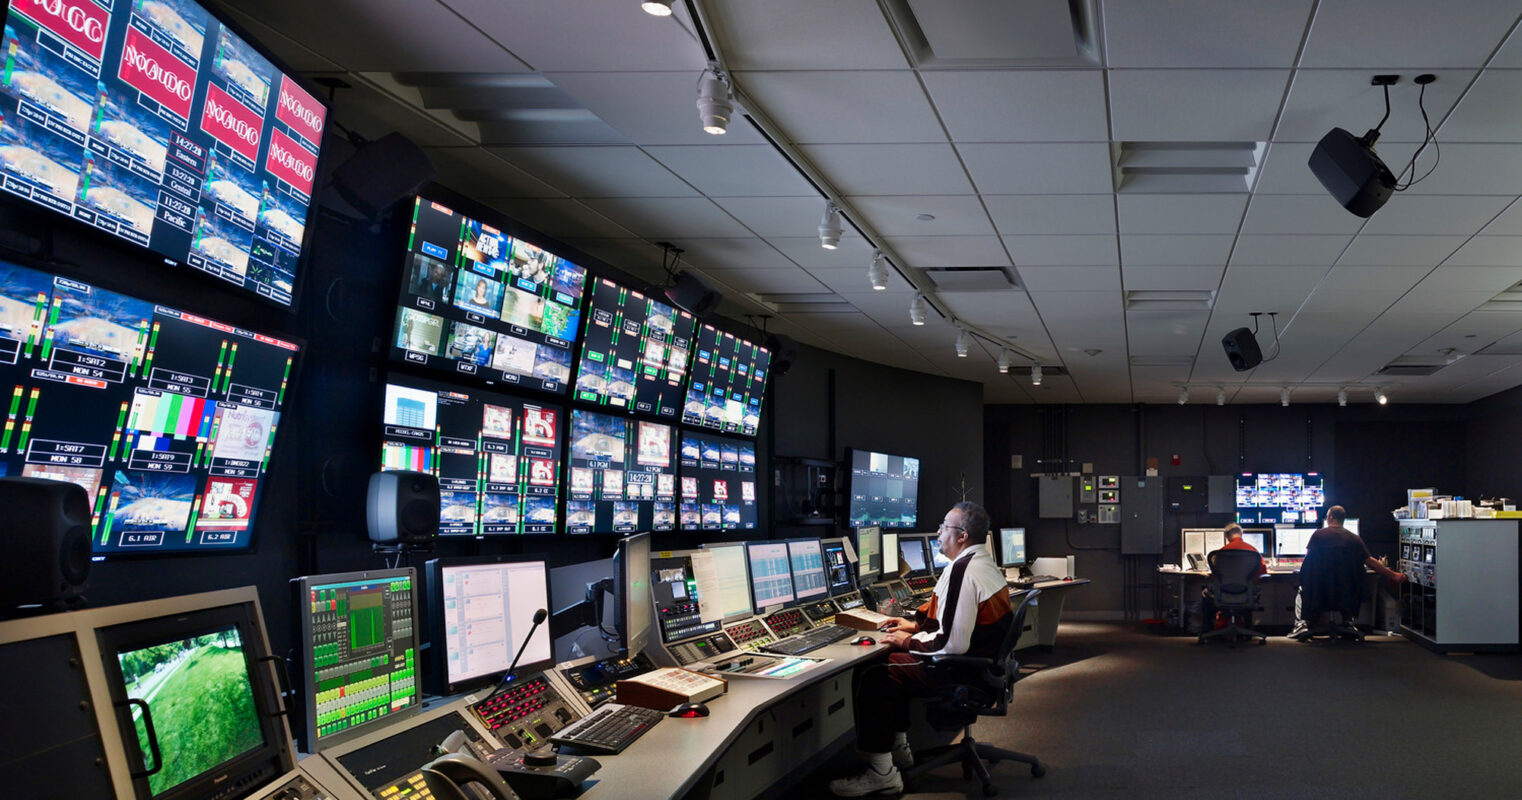 Modern broadcast control room with ergonomic design featuring multiple illuminated screens, technical consoles, and one operator in a dimly lit environment optimizing focus on digital content.